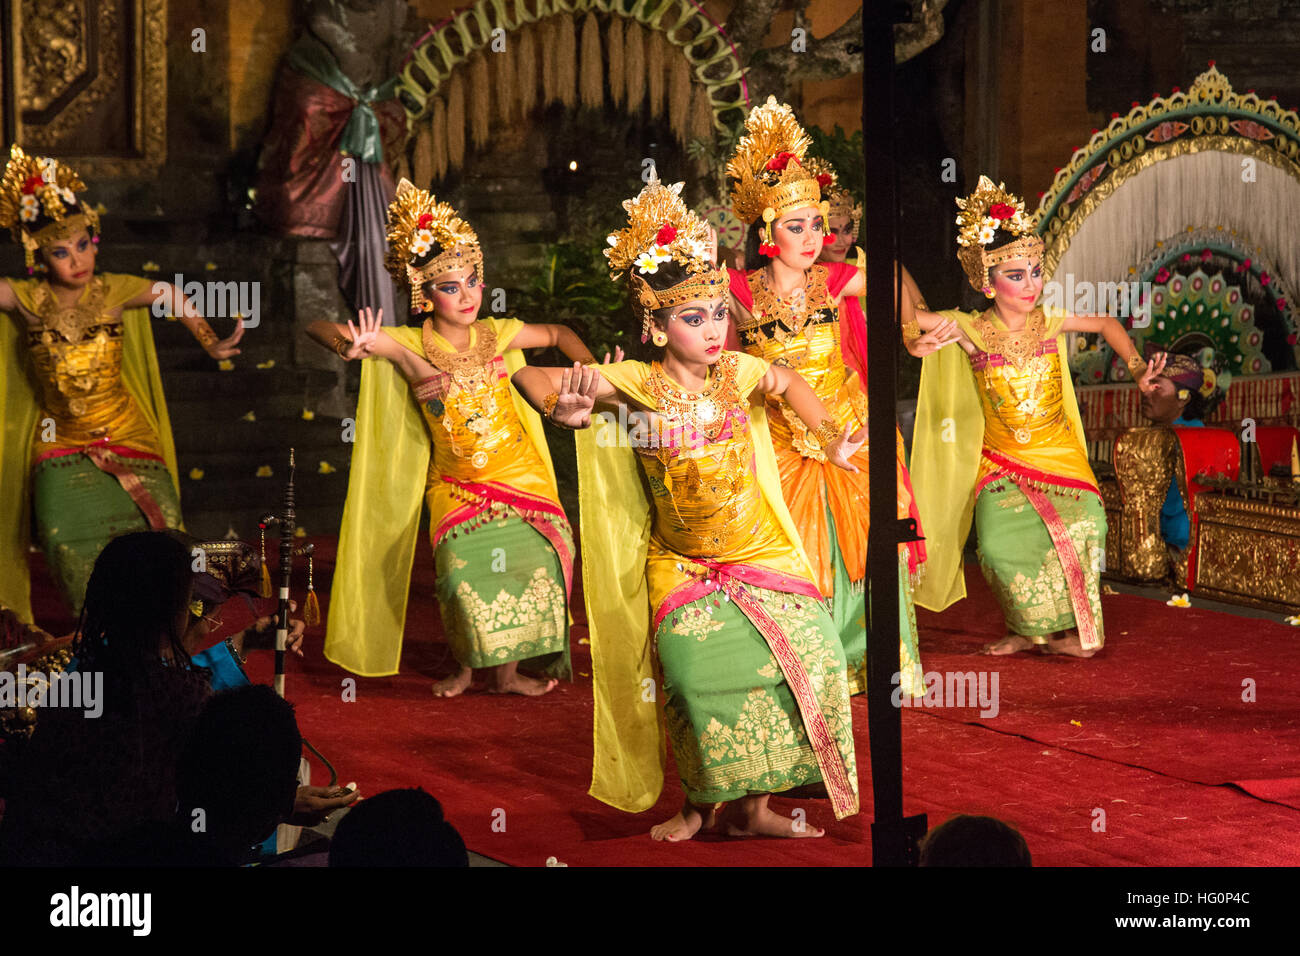 Ubud, Indonesia - July 01, 2015: Traditional dance Legong and Barong performed by professional actors in Ubud Palace Stock Photo